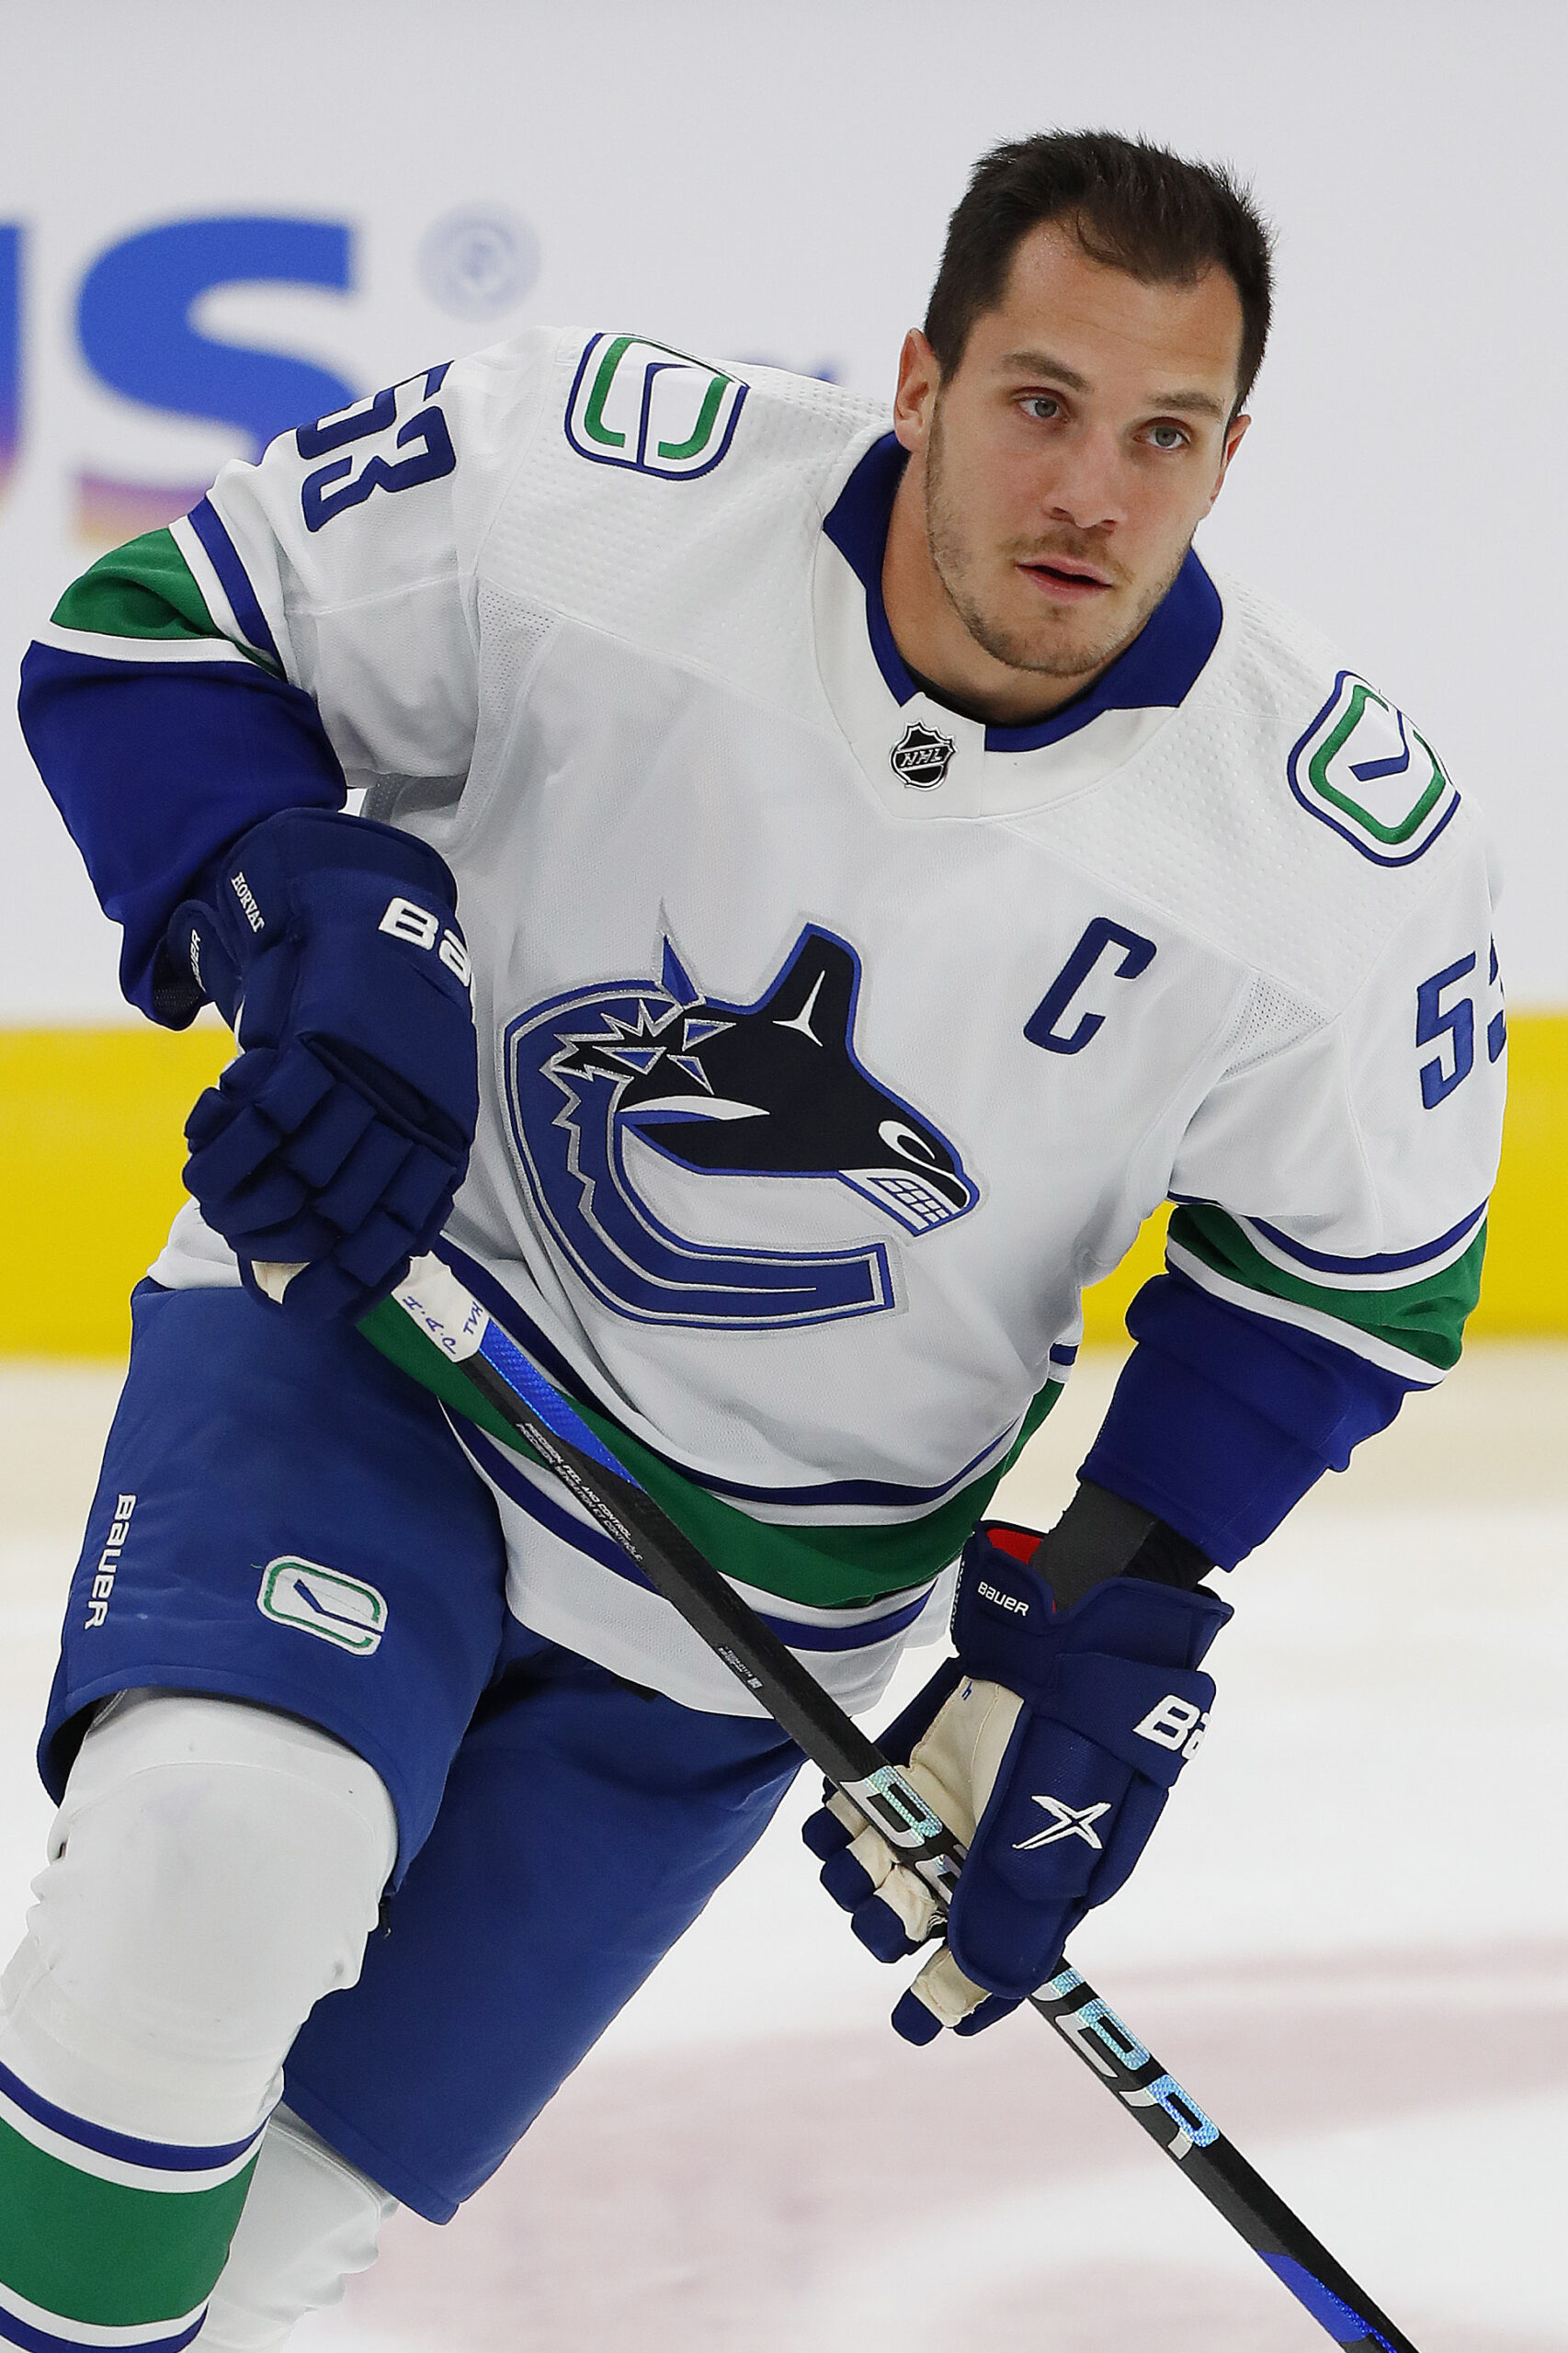 Bo Horvat doesn't want to talk trade or contract status